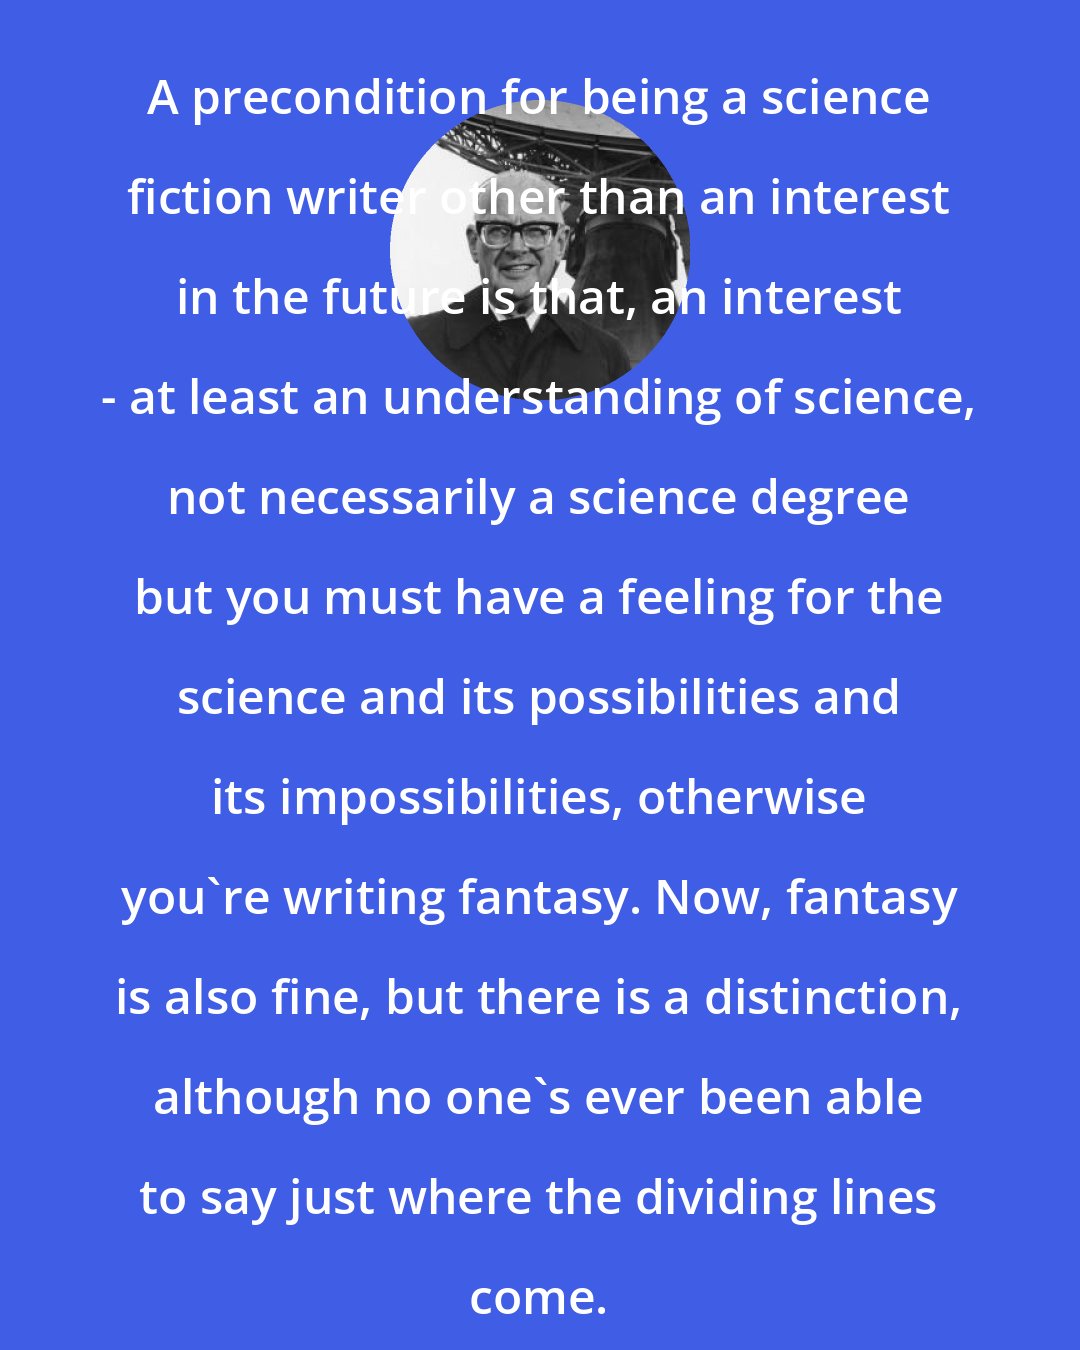 Arthur C. Clarke: A precondition for being a science fiction writer other than an interest in the future is that, an interest - at least an understanding of science, not necessarily a science degree but you must have a feeling for the science and its possibilities and its impossibilities, otherwise you're writing fantasy. Now, fantasy is also fine, but there is a distinction, although no one's ever been able to say just where the dividing lines come.